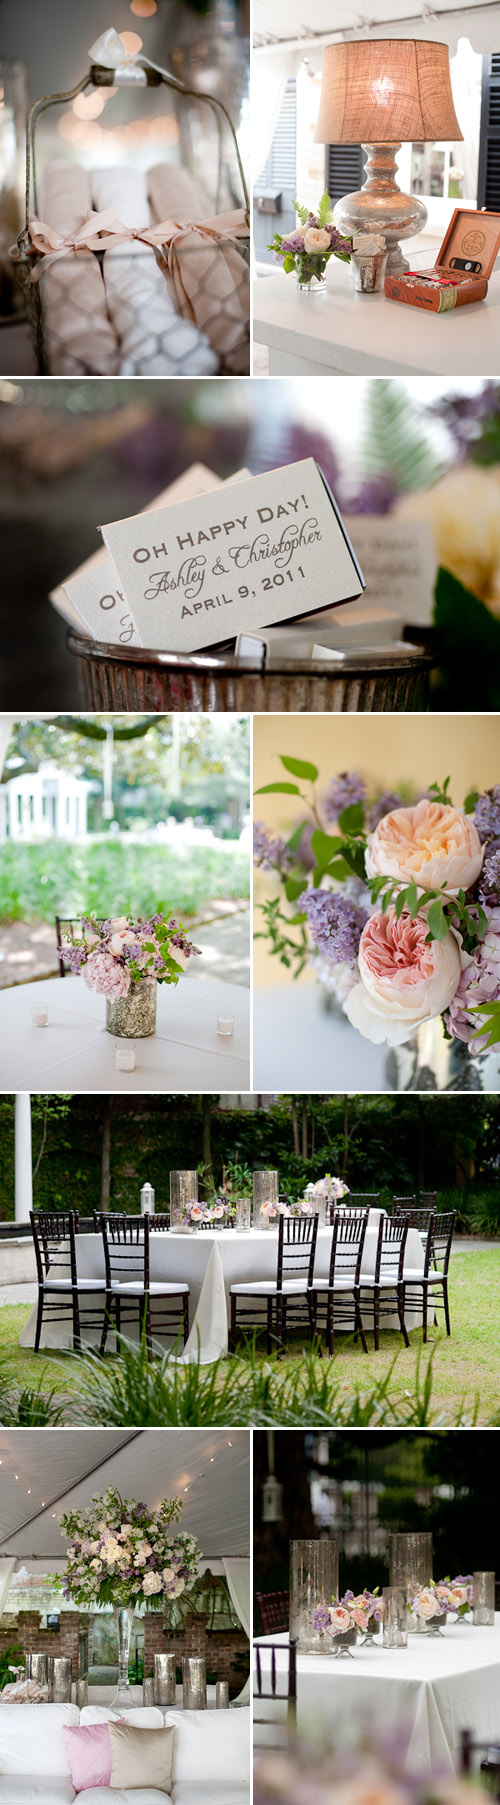 Lavender decor at southern garden wedding reception at William Aiken House in Charleston, South Carolina, photography by Leigh Webber